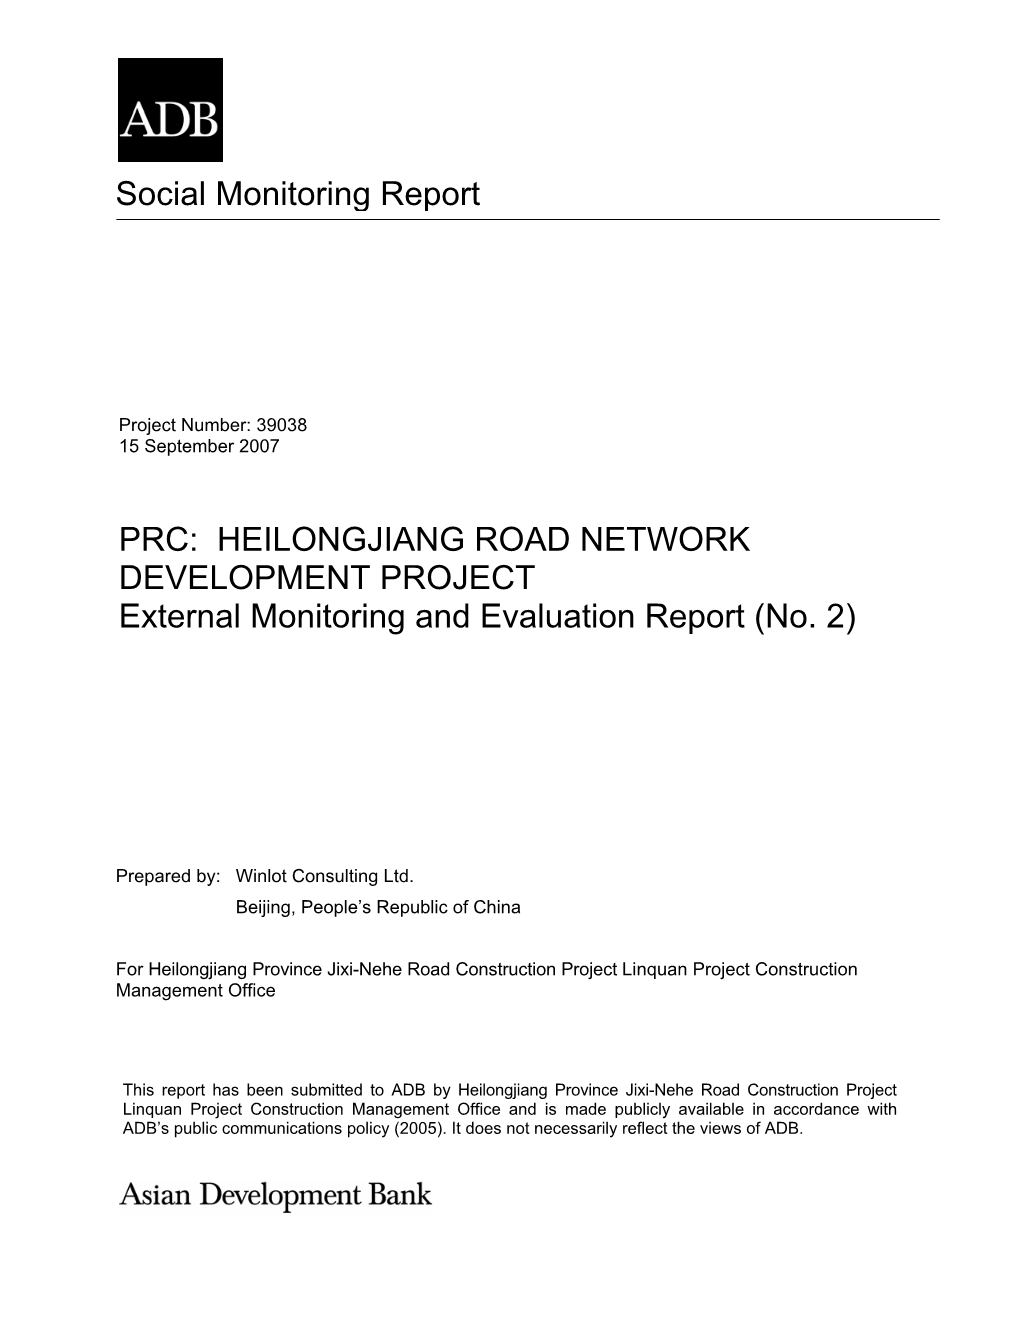 HEILONGJIANG ROAD NETWORK DEVELOPMENT PROJECT External Monitoring and Evaluation Report (No